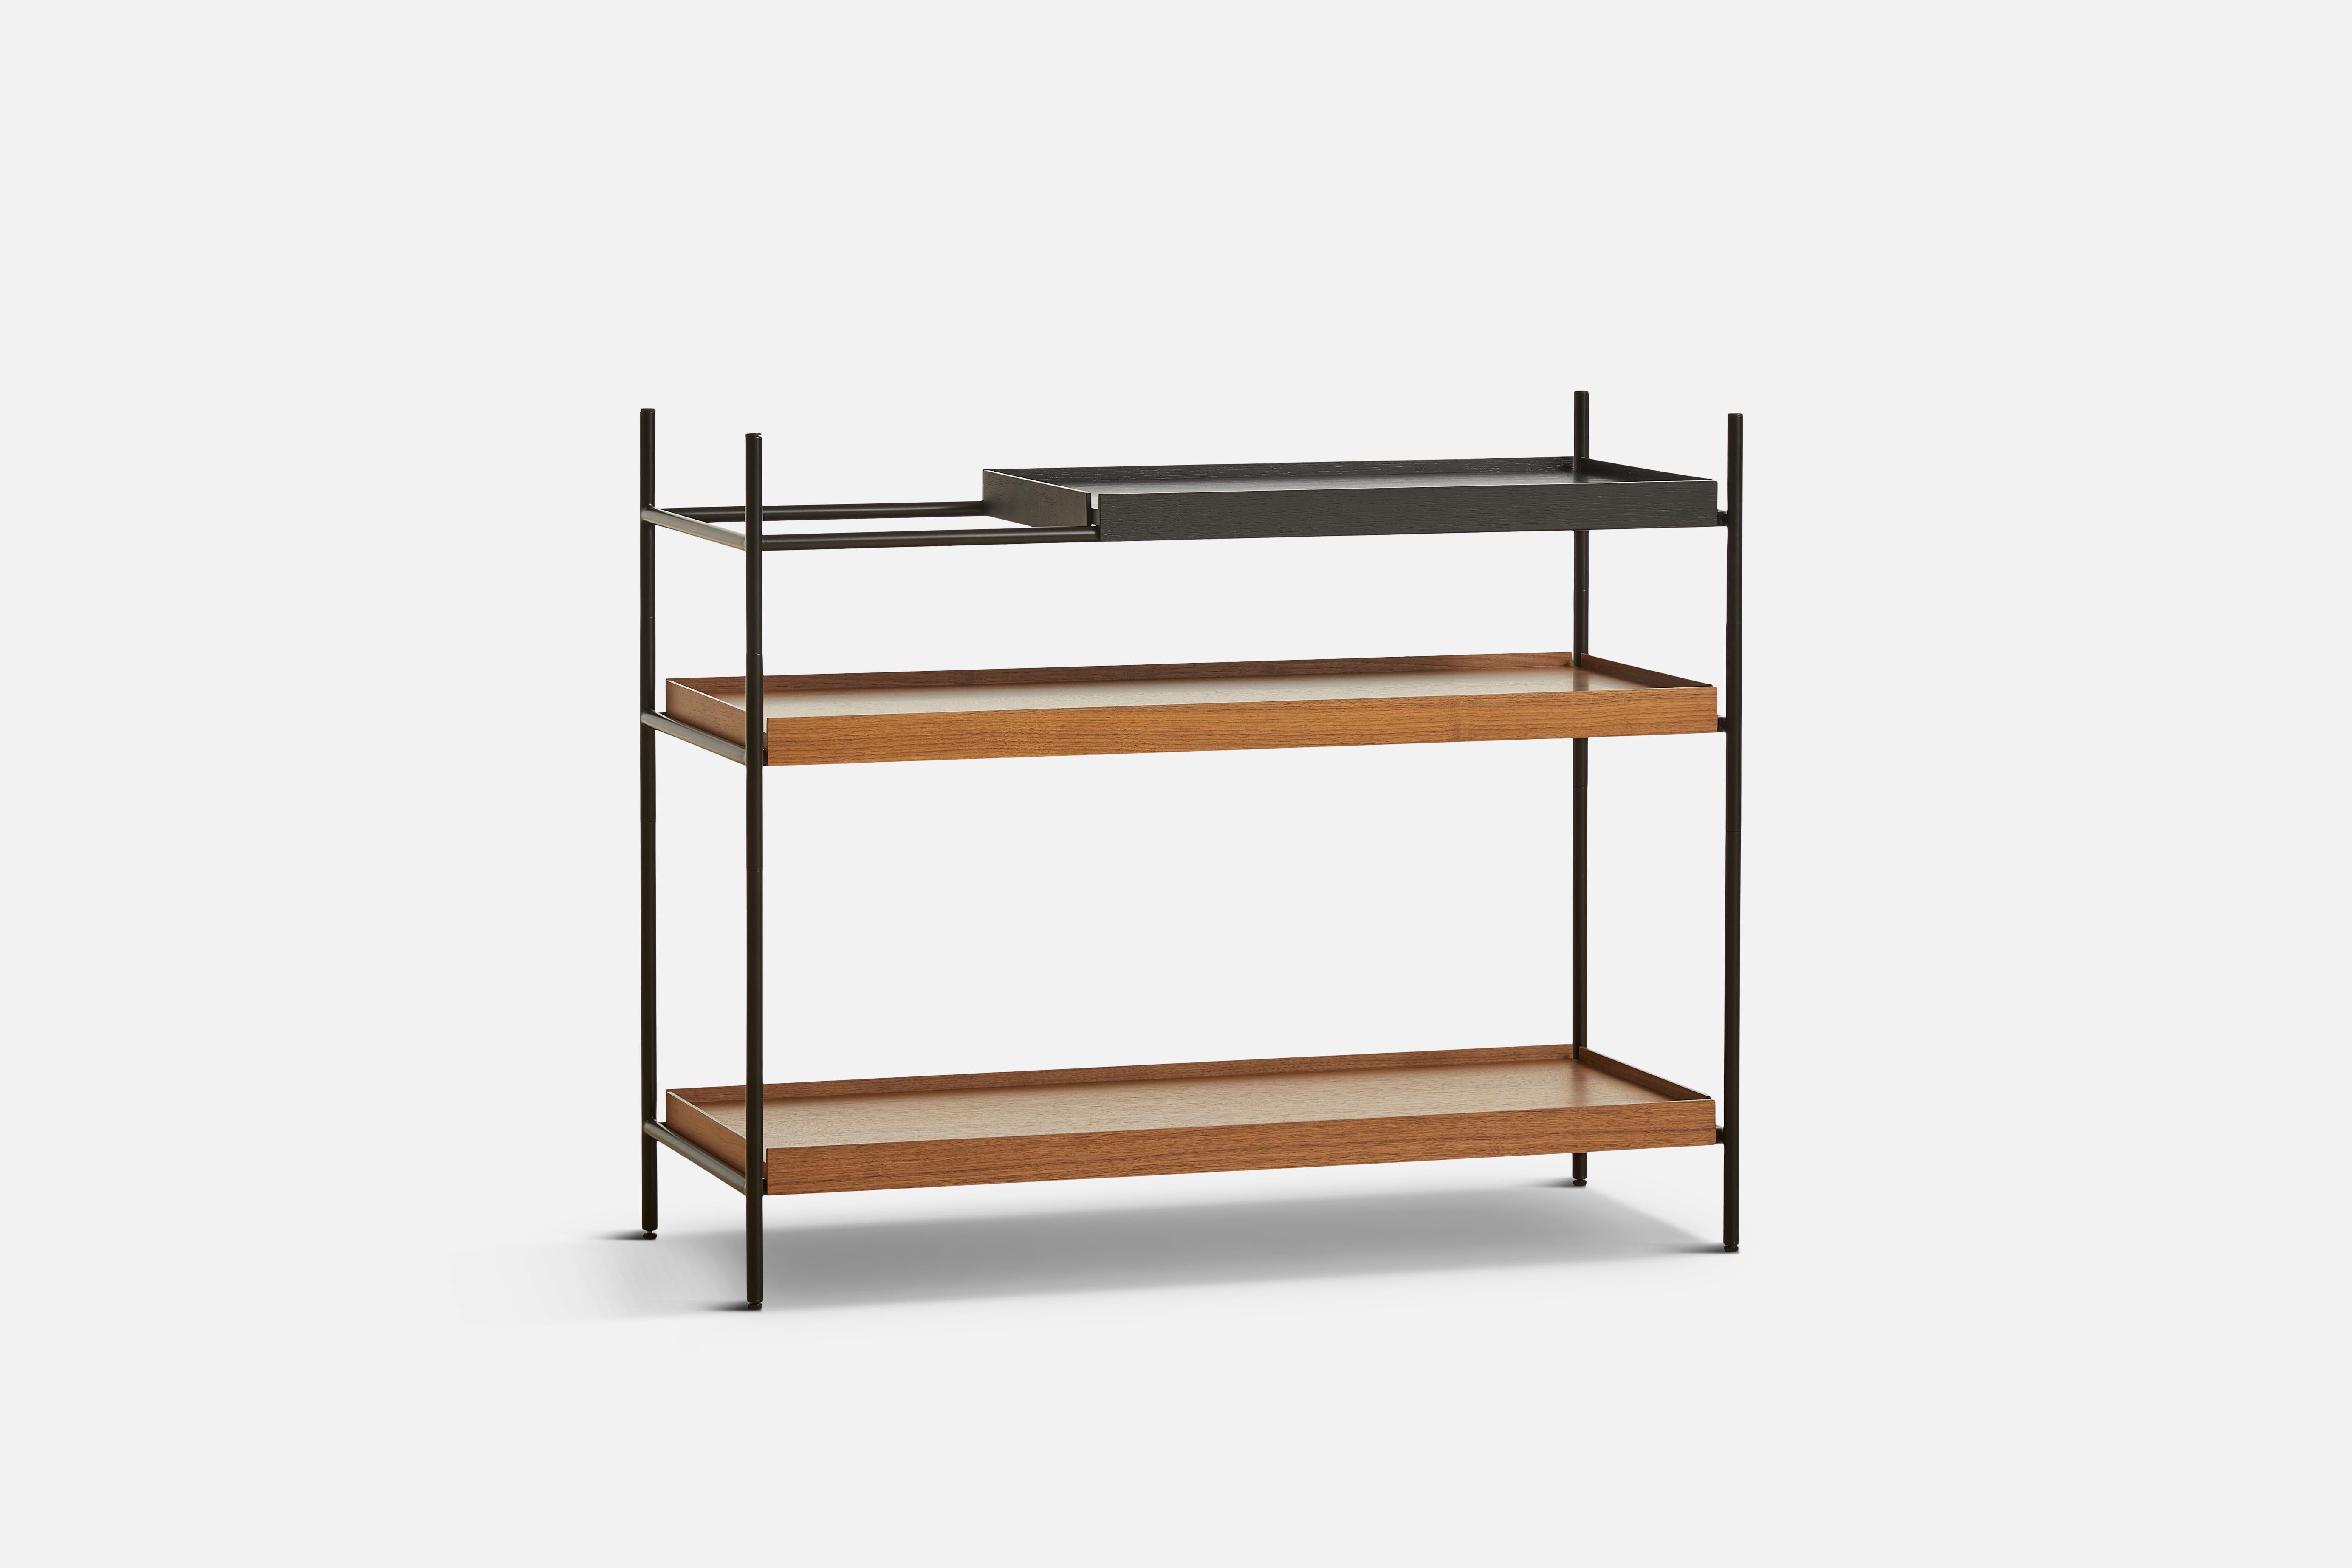 Low walnut and black tray shelf I by Hanne Willmann
Materials: metal, walnut.
Dimensions: D 40 x W 100 x H 81 cm
Also available in different tray conbinations and 2 sizes: H 81, H 201 cm.

Hanne Willmann is a dynamic German designer with her